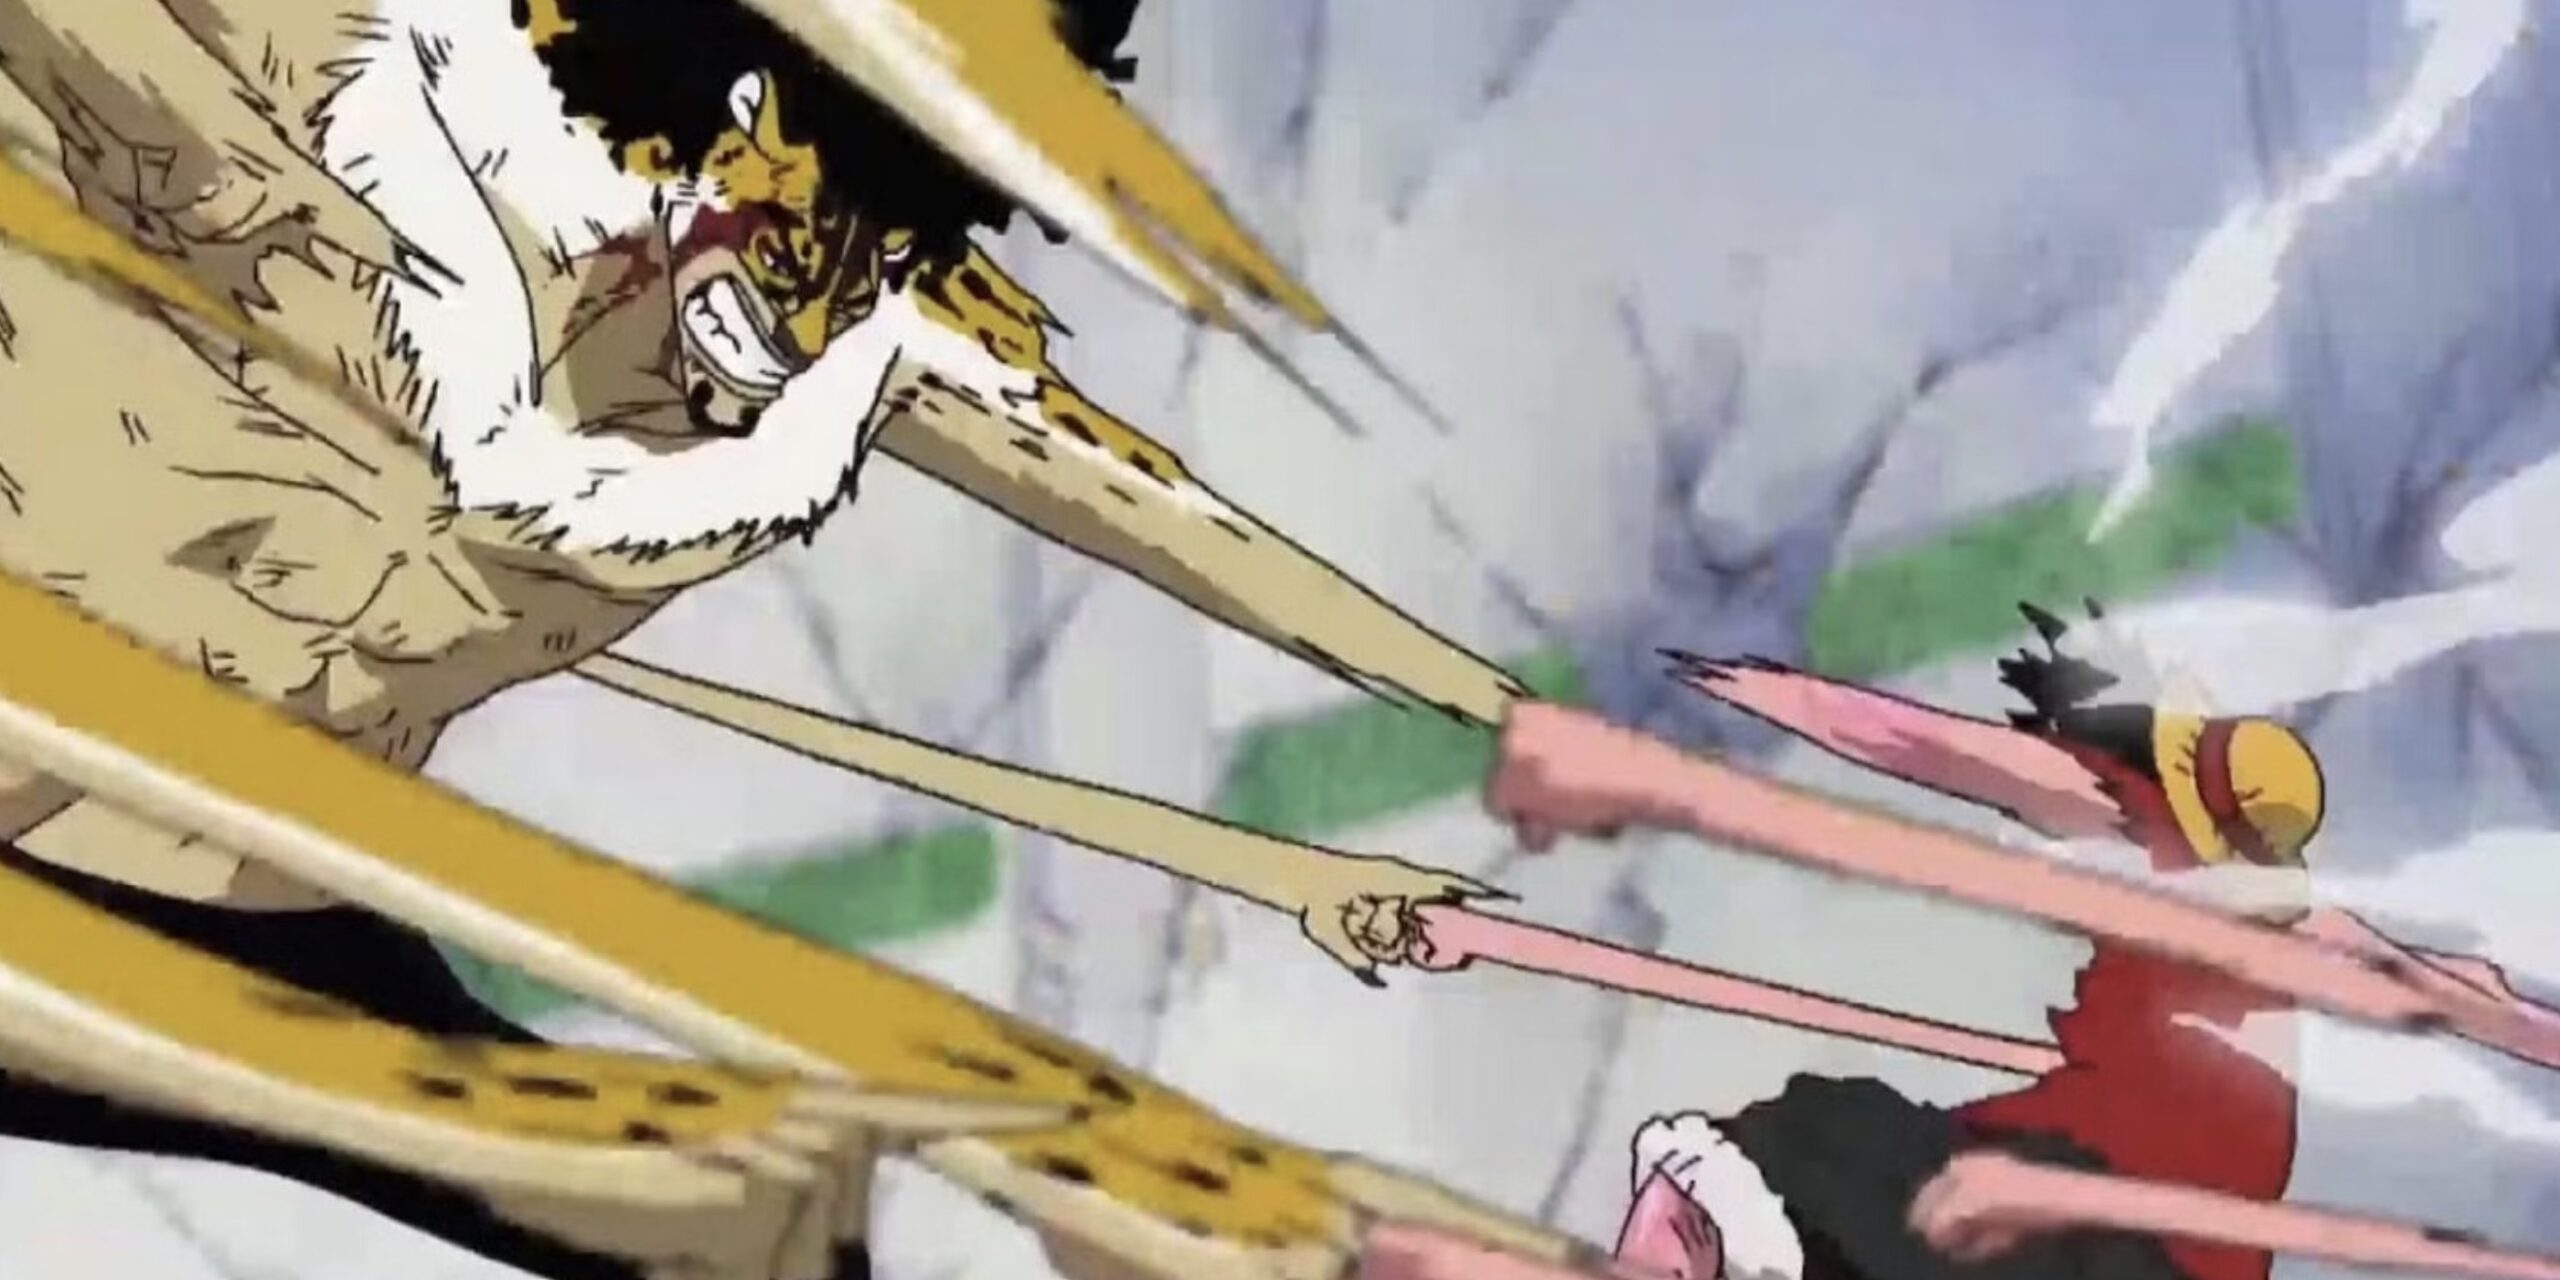 15 Strongest One Piece Characters Luffy Can Defeat Now